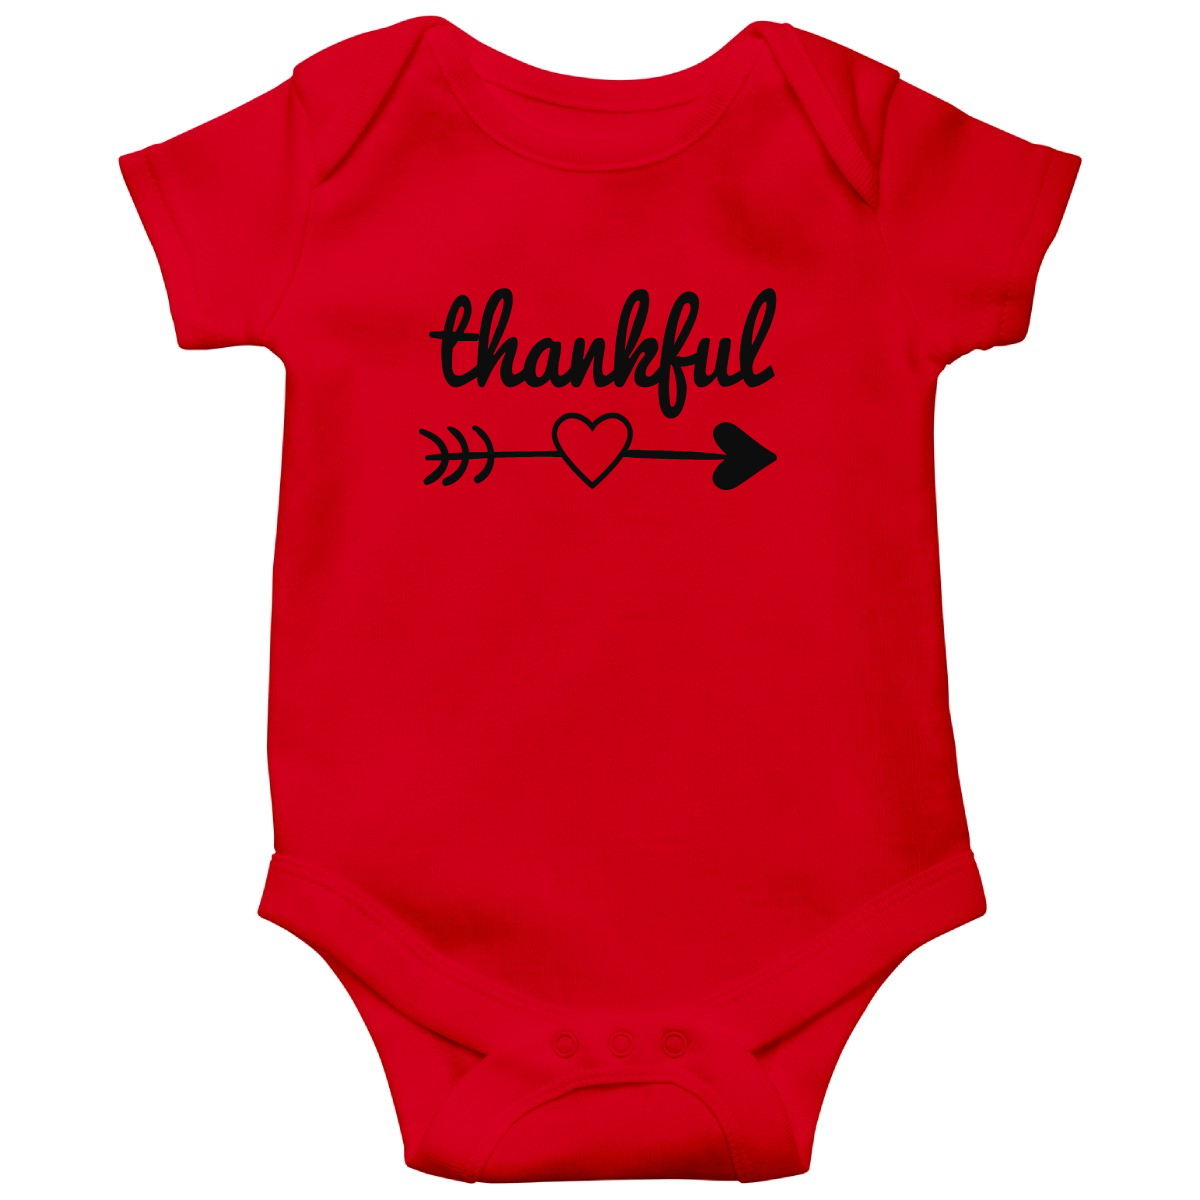 Thankful Heart Baby Bodysuits | Red